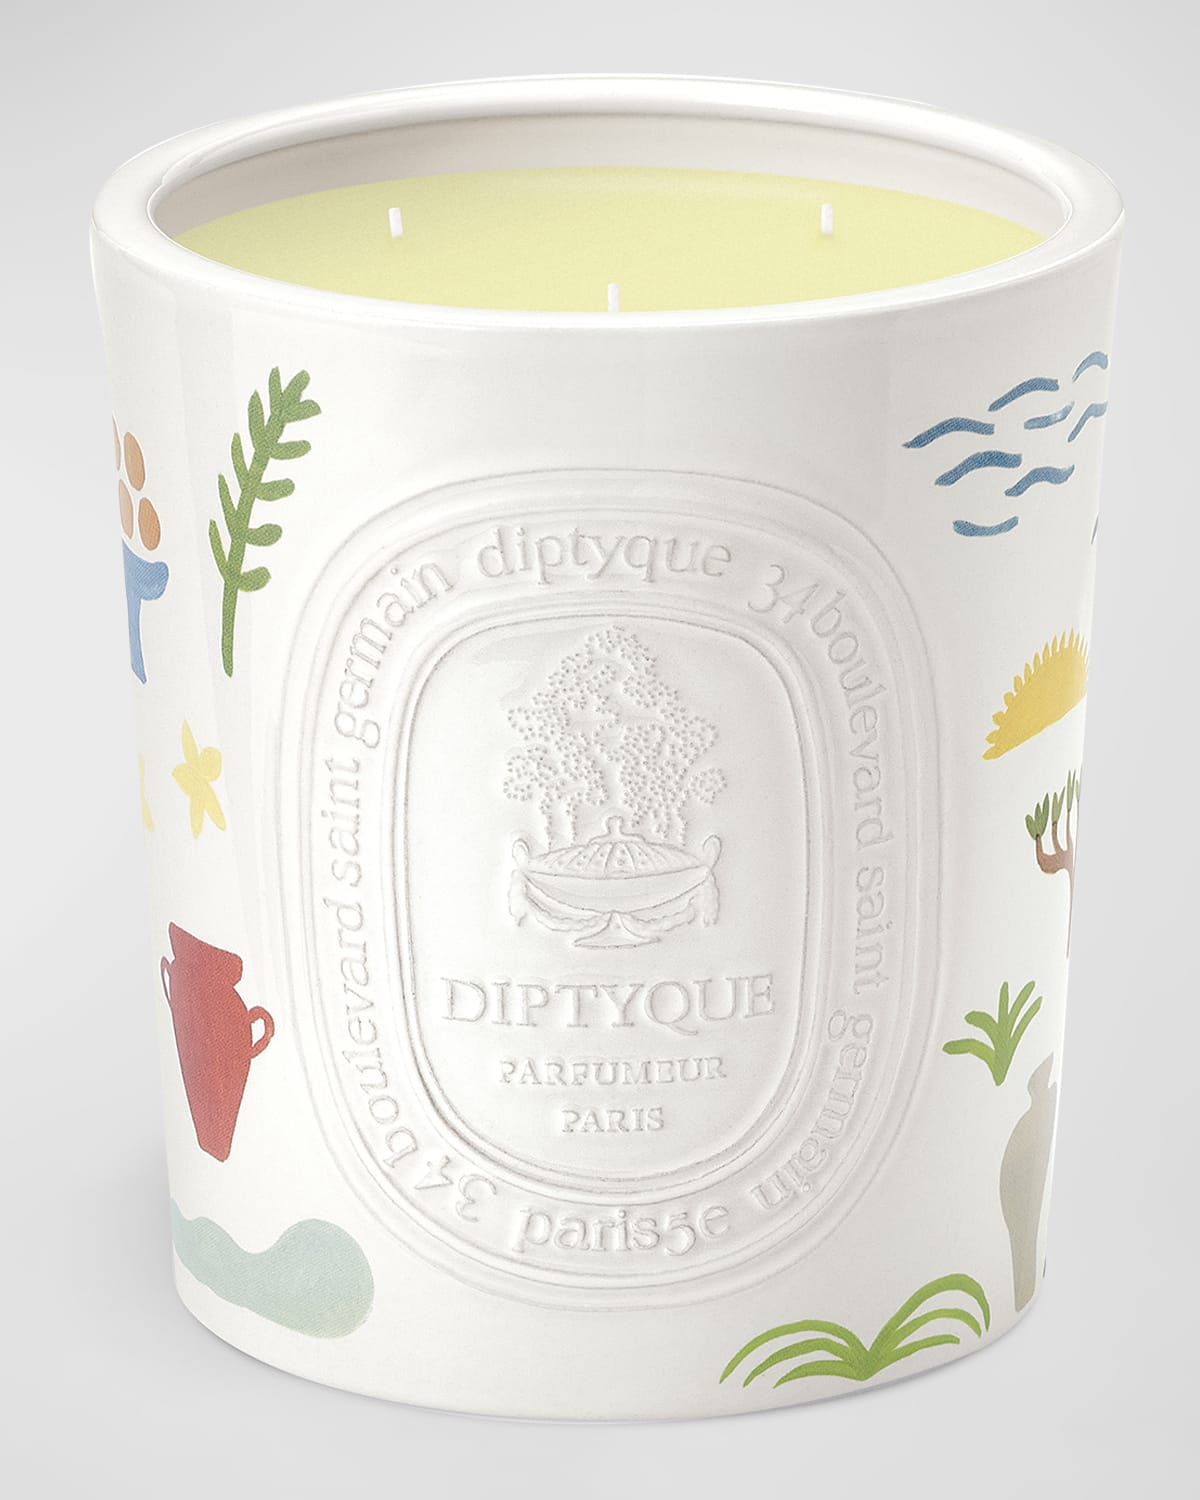 DIPTYQUE CITRONNELLE INDOOR/OUTDOOR SCENTED CANDLE, 51.3 OZ. - LIMITED EDITION